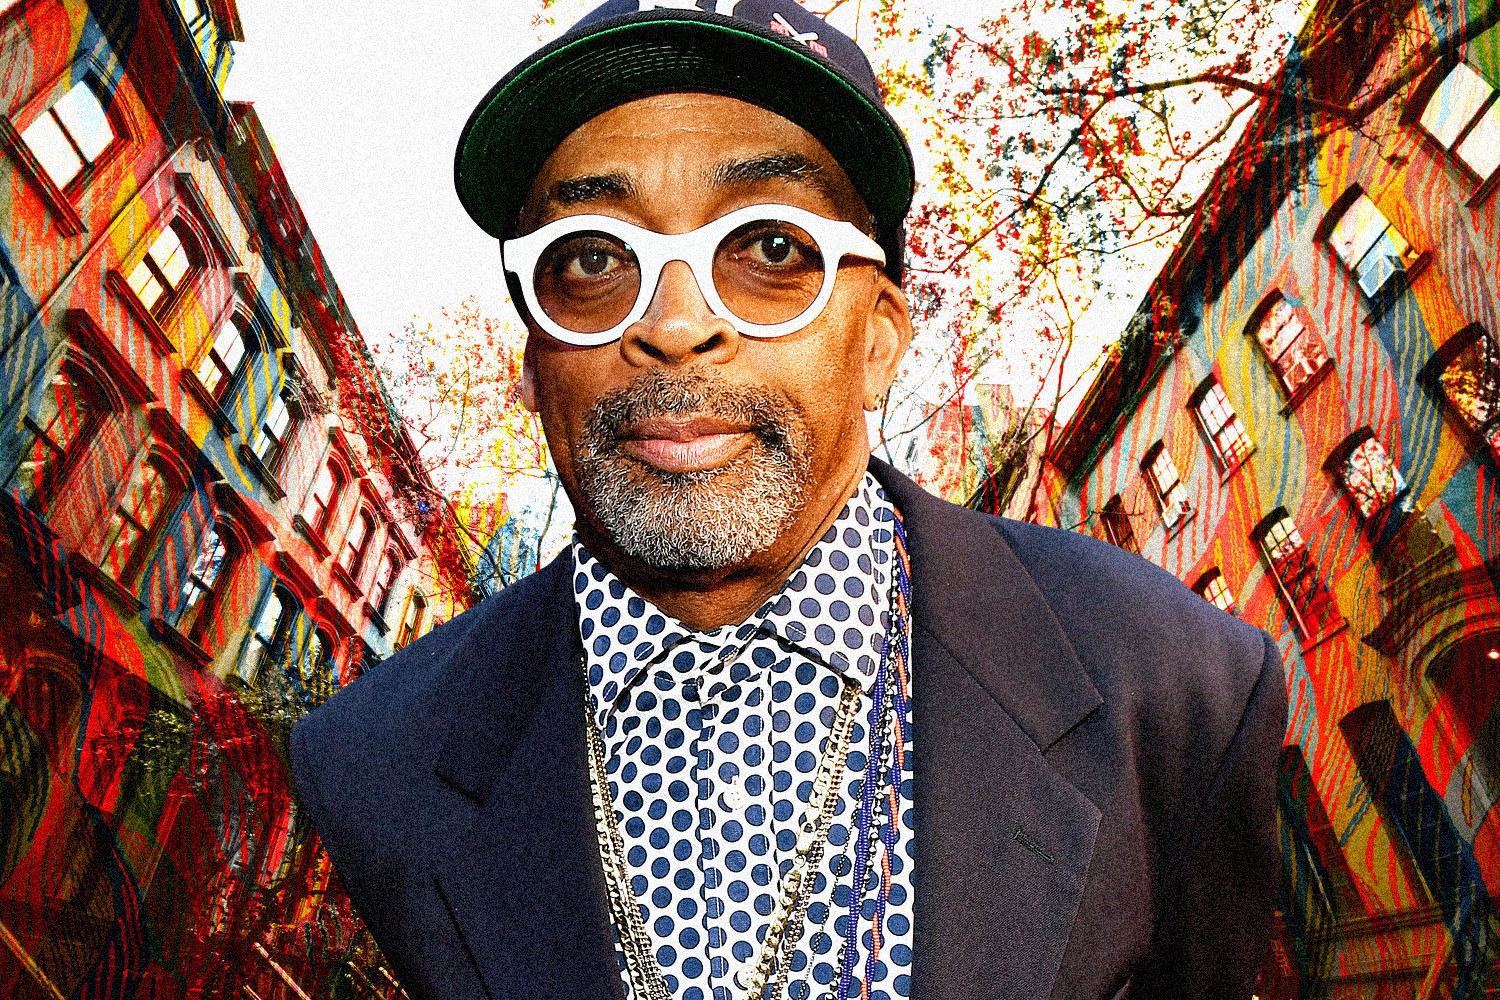 Born and raised in Brooklyn, Spike Lee is now an iconic movie director